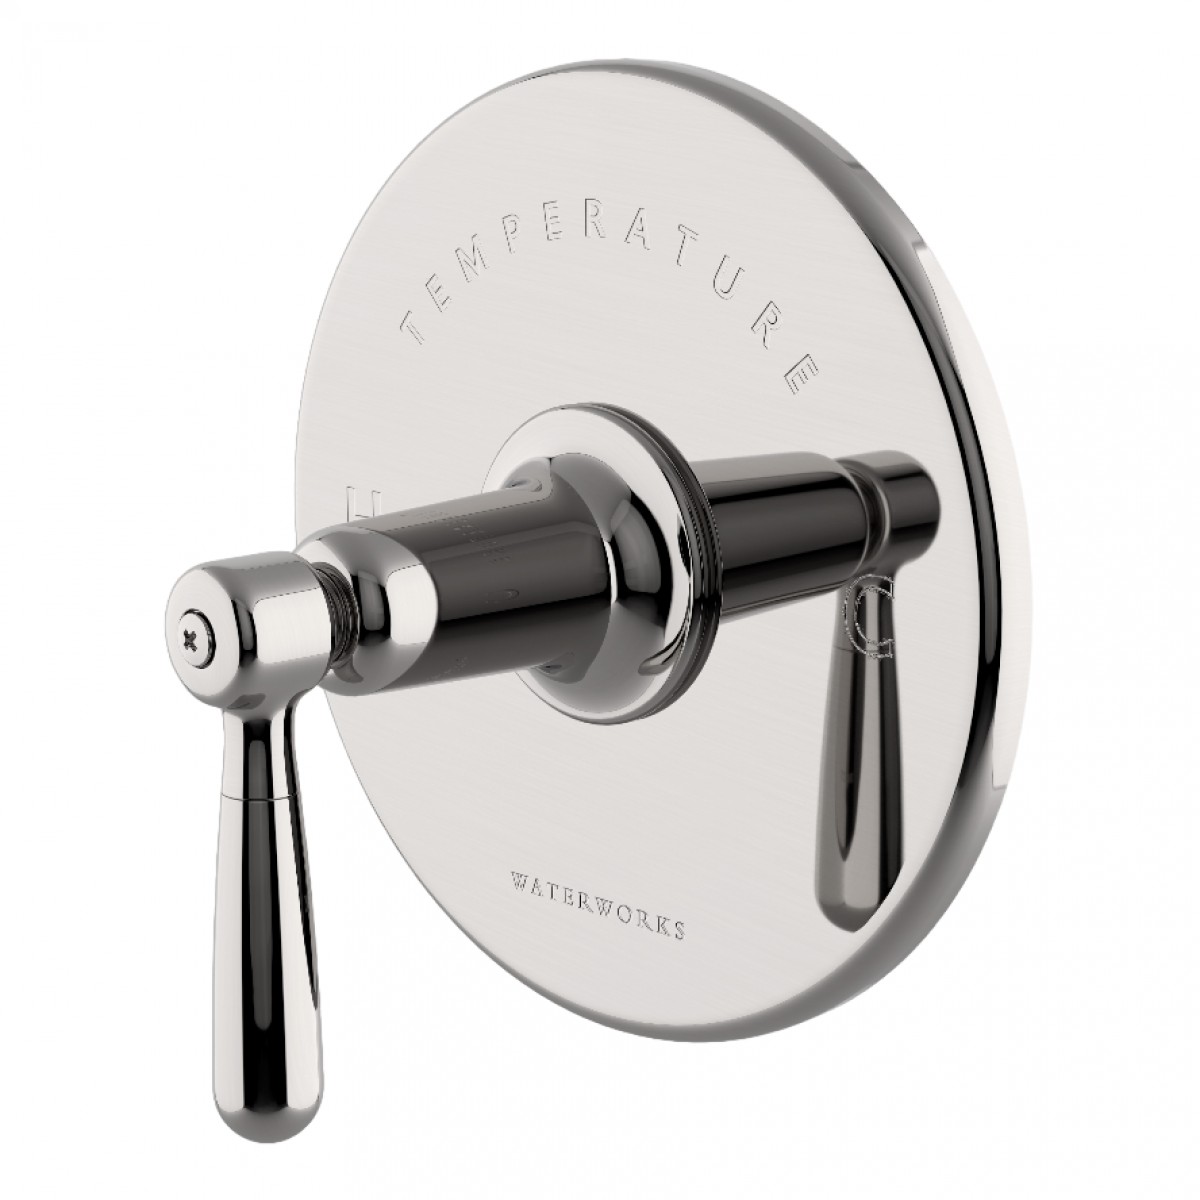 Riverun Single Thermostatic Control Valve Trim with Lever Handle | Highlight image